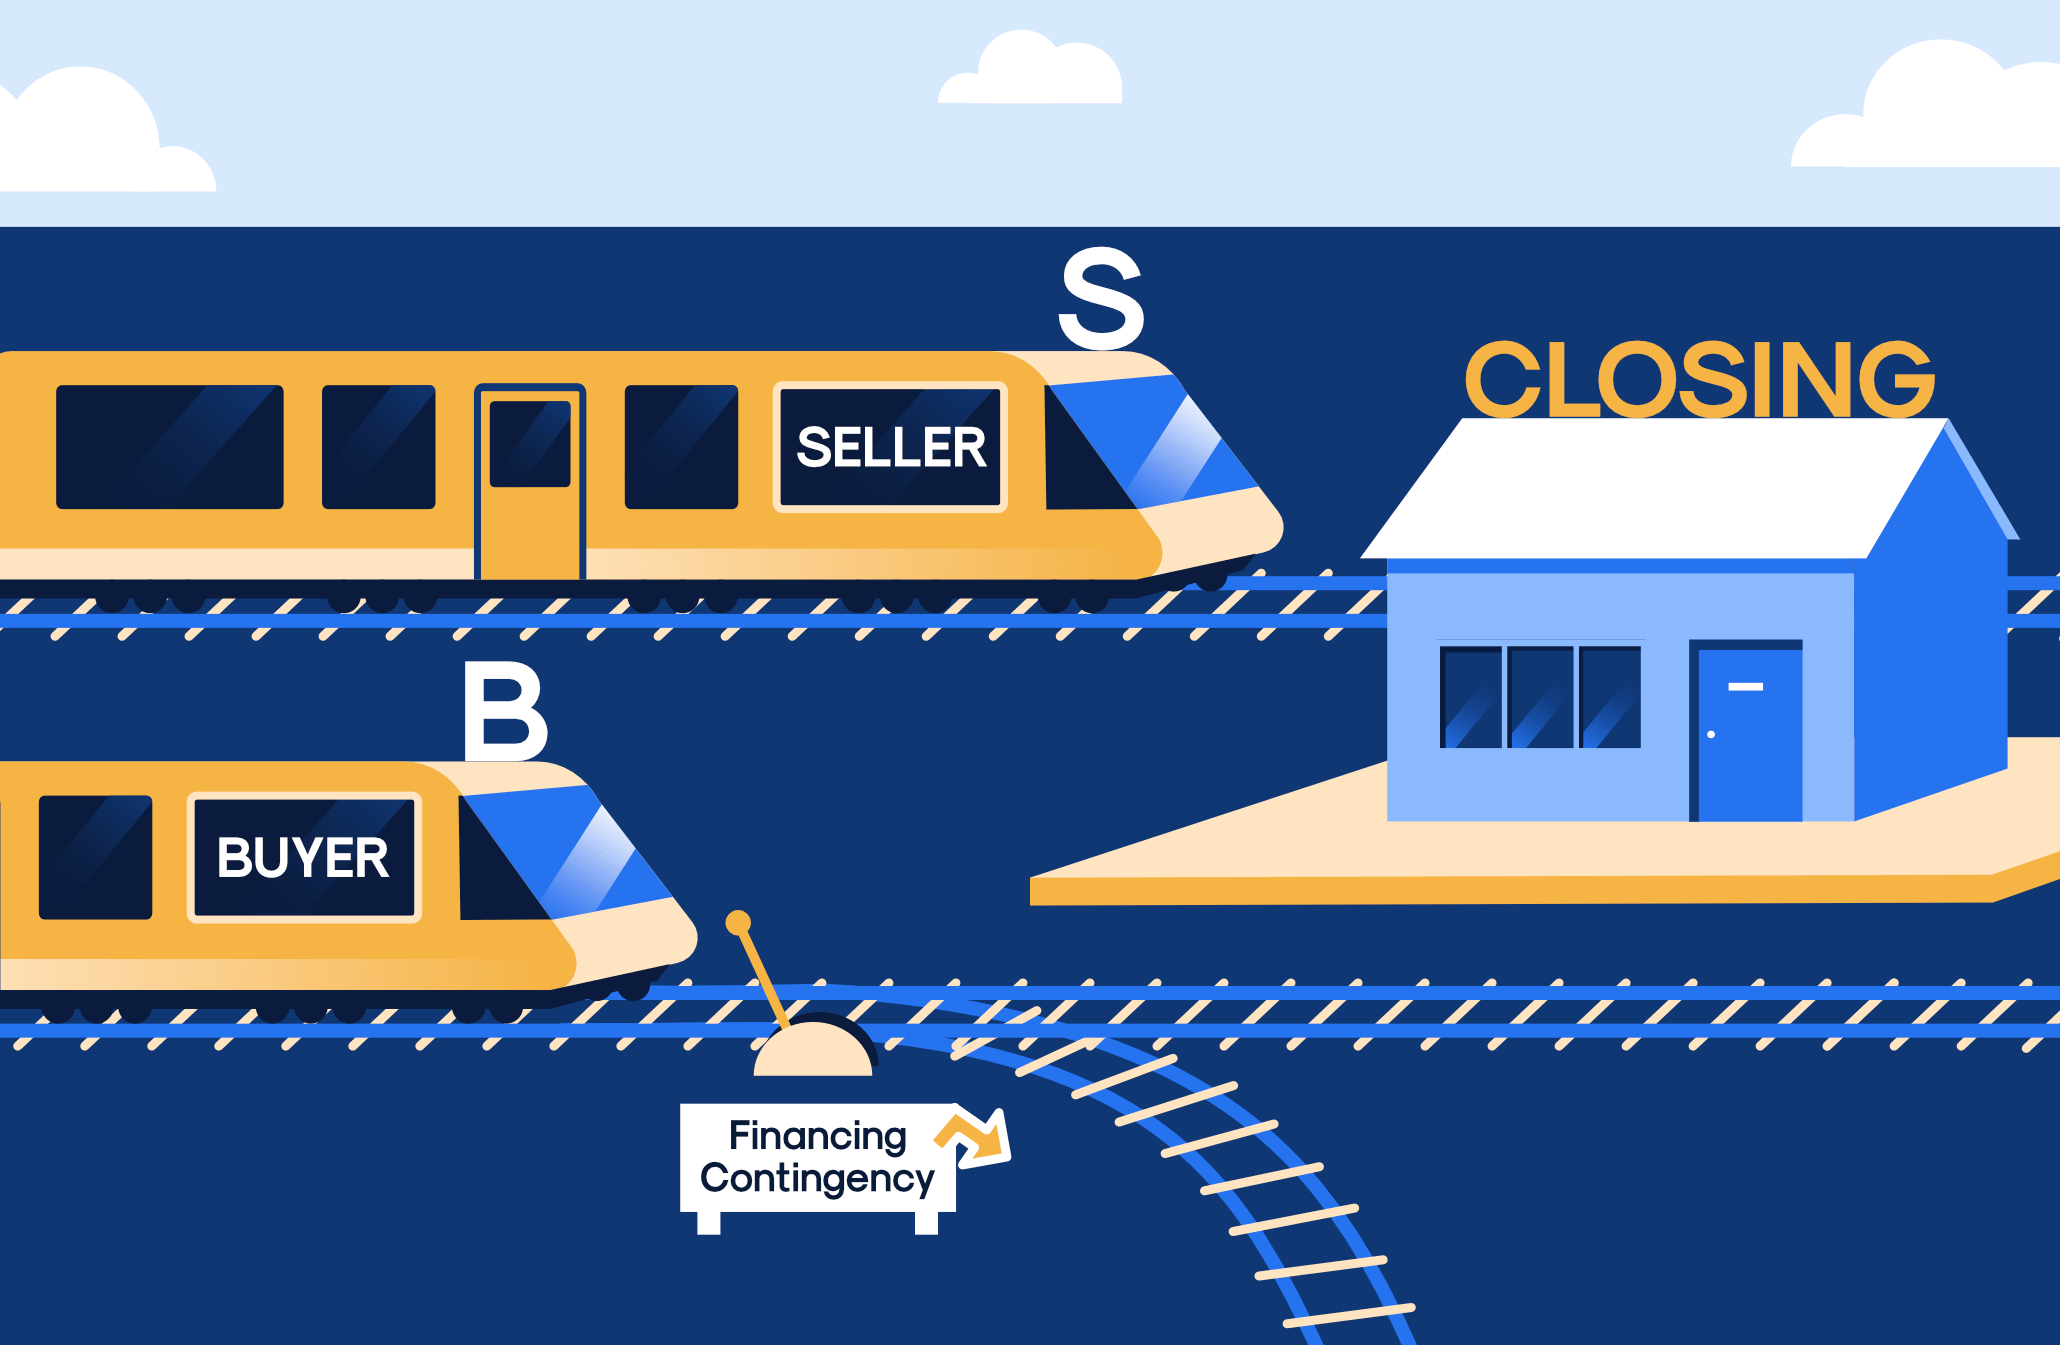 Buyer and seller on trains heading to the closing but the buyer has a switch labeled Financing Contingency to change tracks and avoid the closing